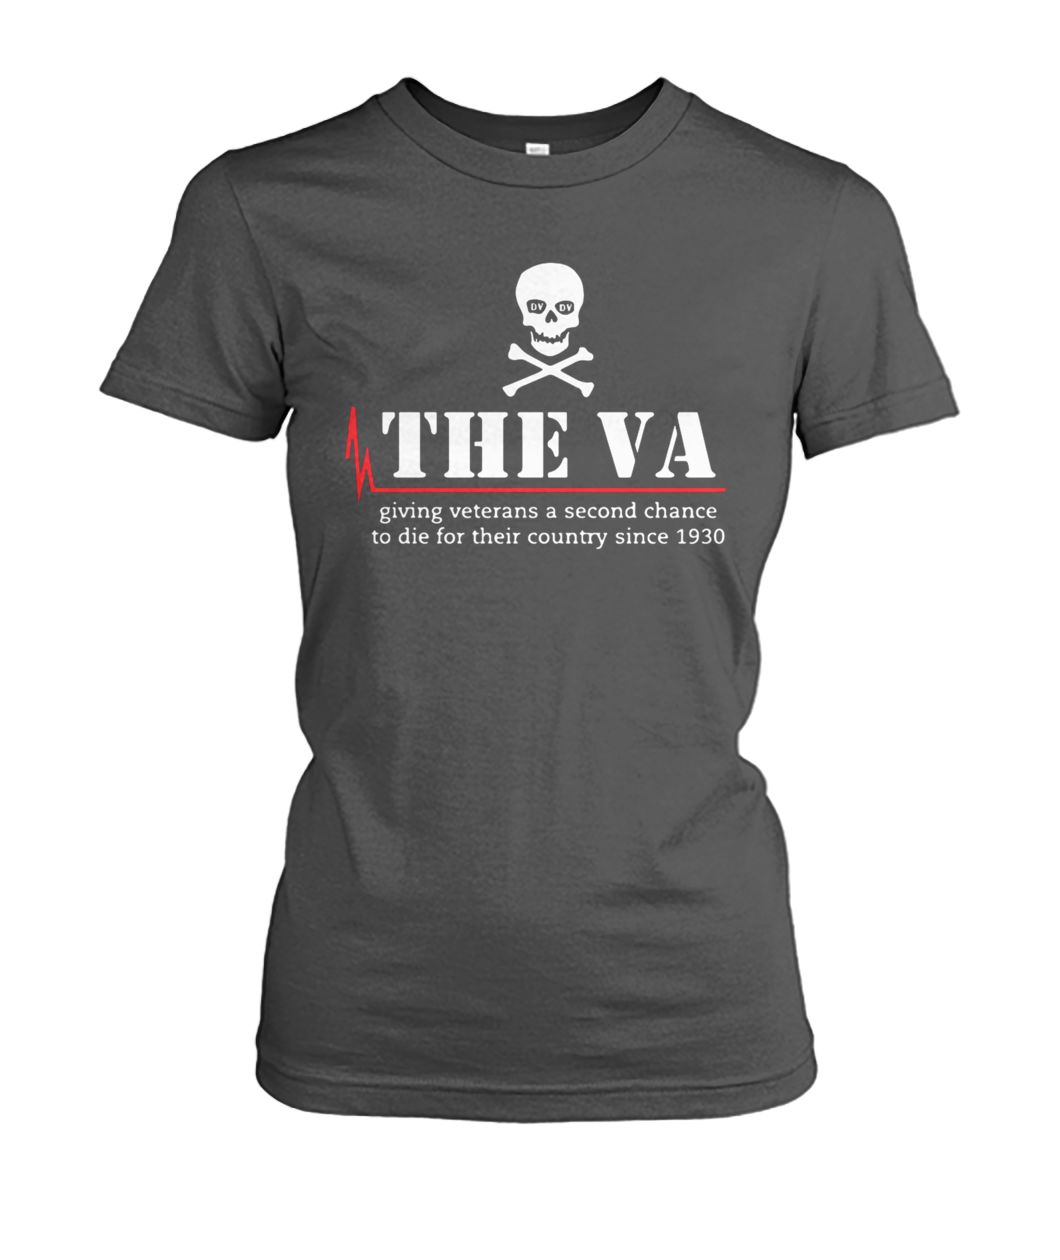 Skull the va giving veterans a second chance to die for their country since 1930 women's crew tee